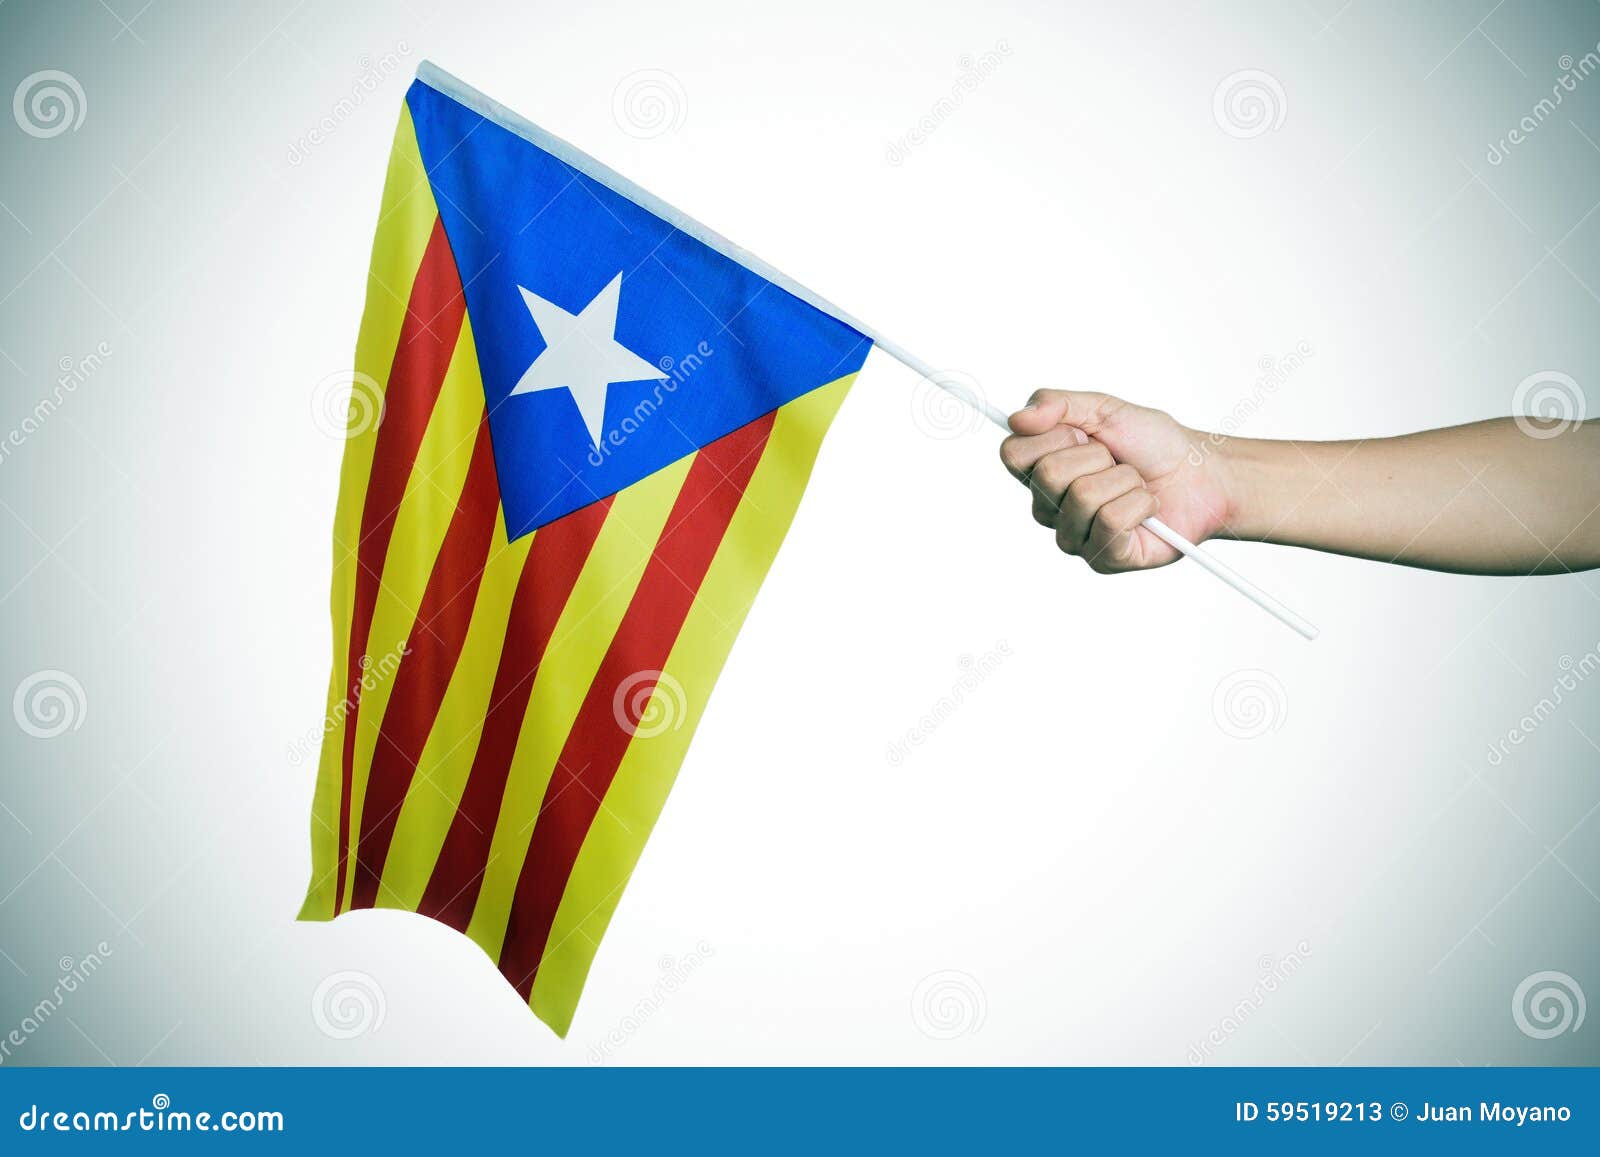 man with the estelada, the catalan pro-independence flag, vignet